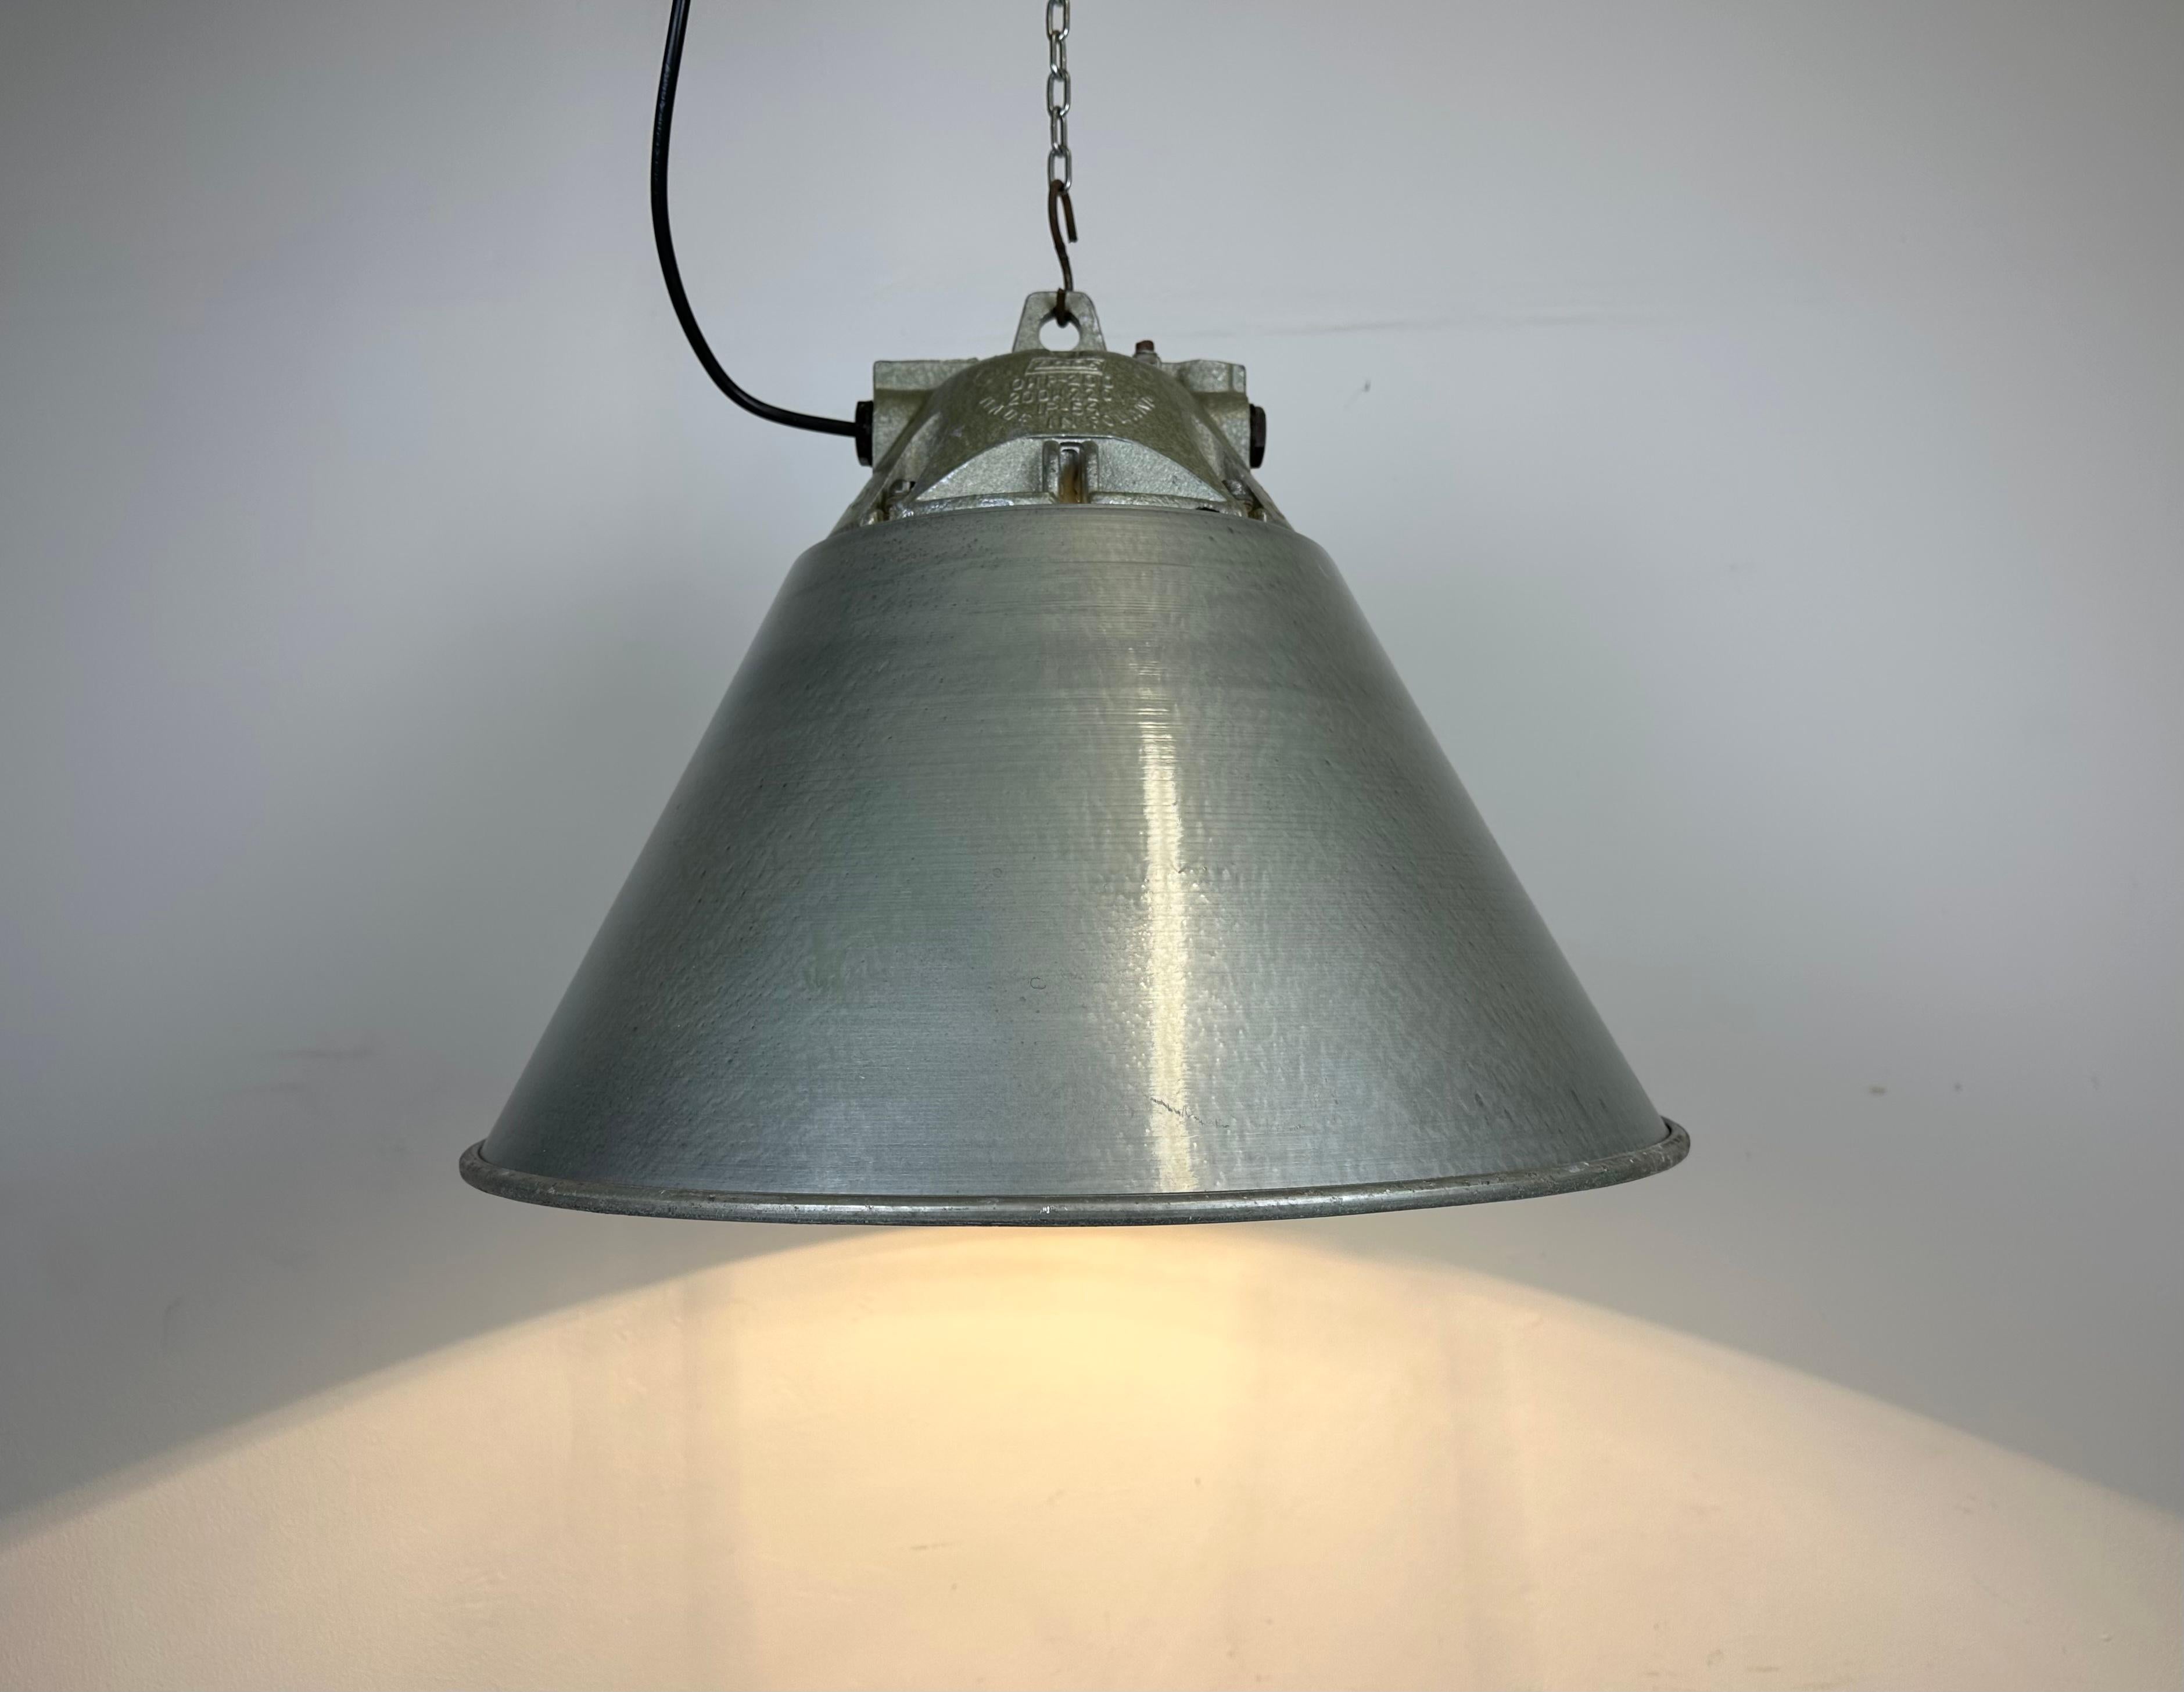 Grey Industrial Explosion Proof Lamp with Aluminum Shade from Zaos, 1970s For Sale 3